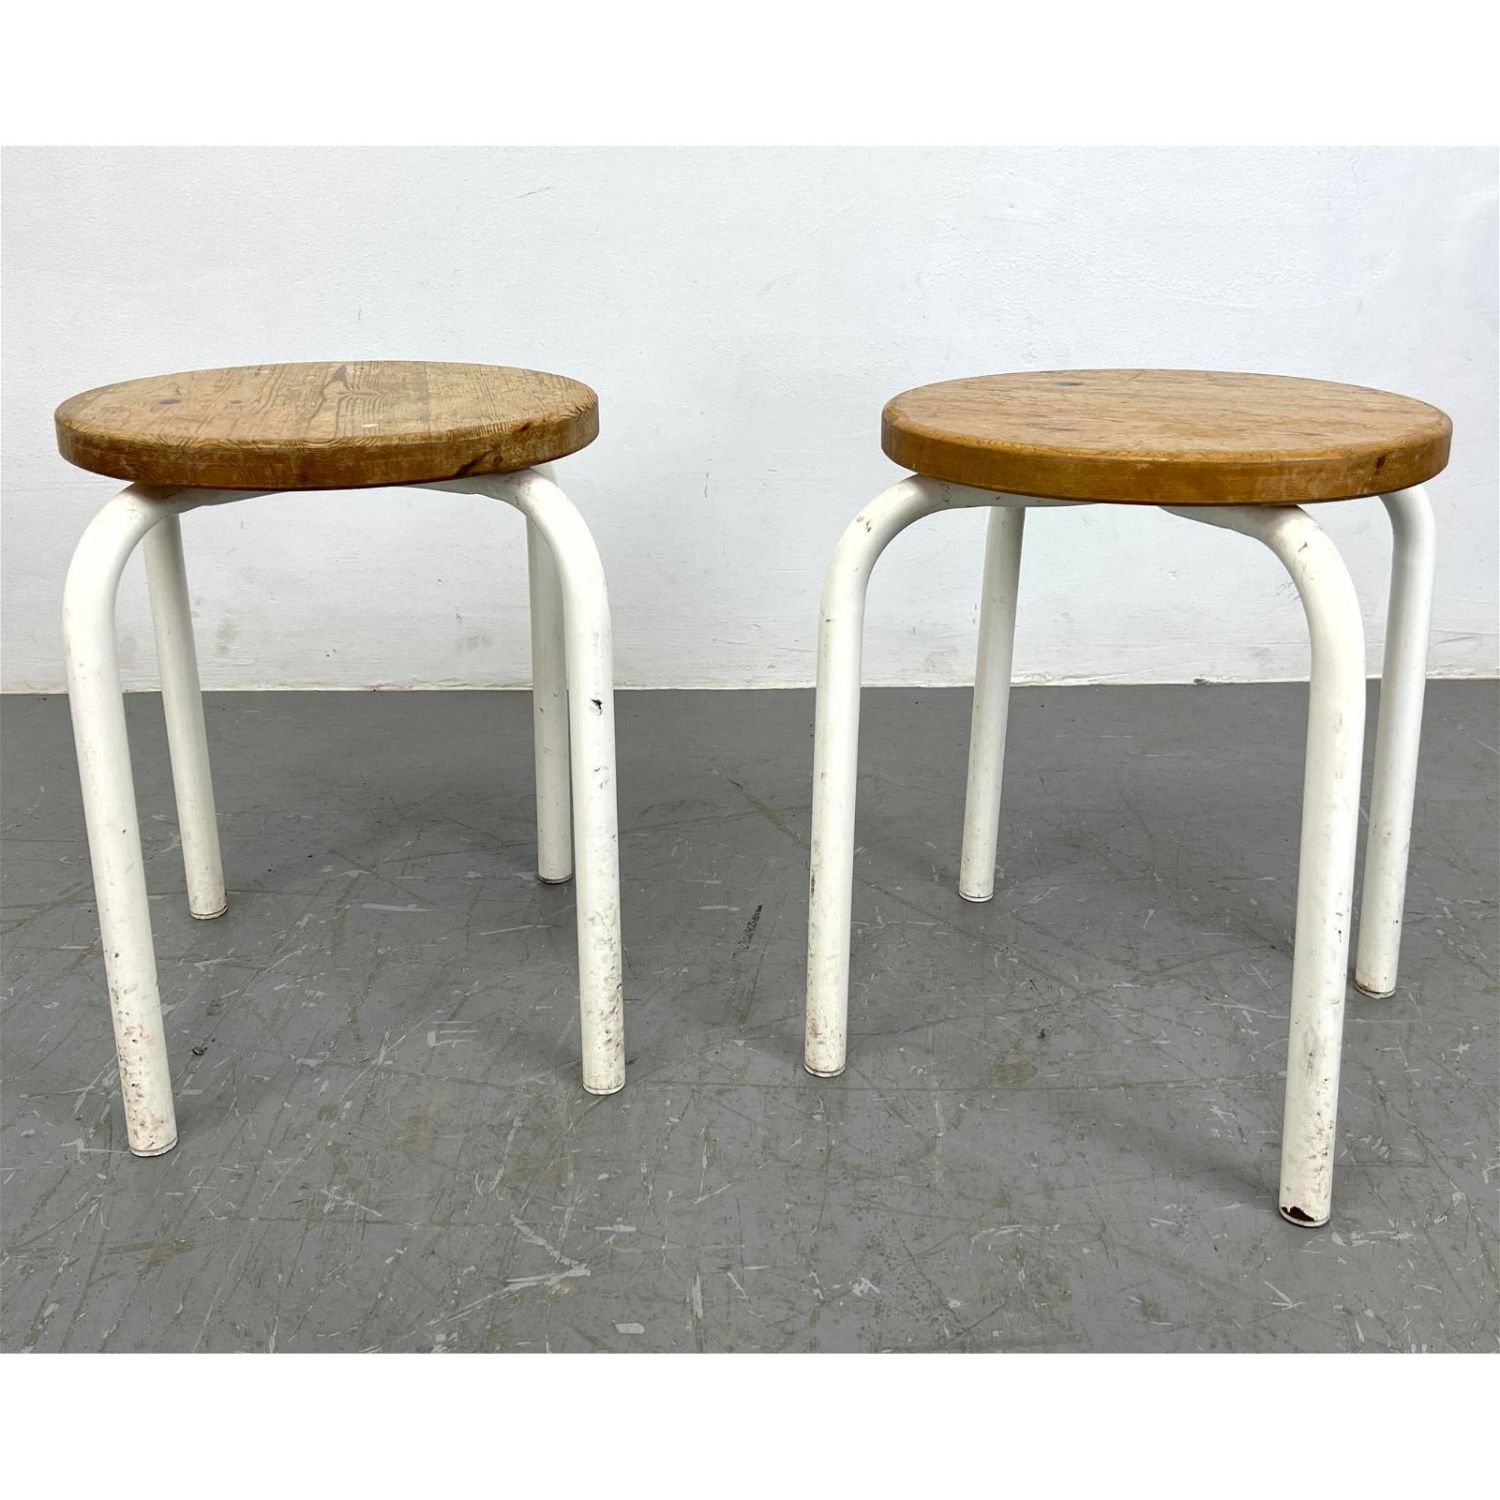 Pr Tubax Stacking Stools with Pine